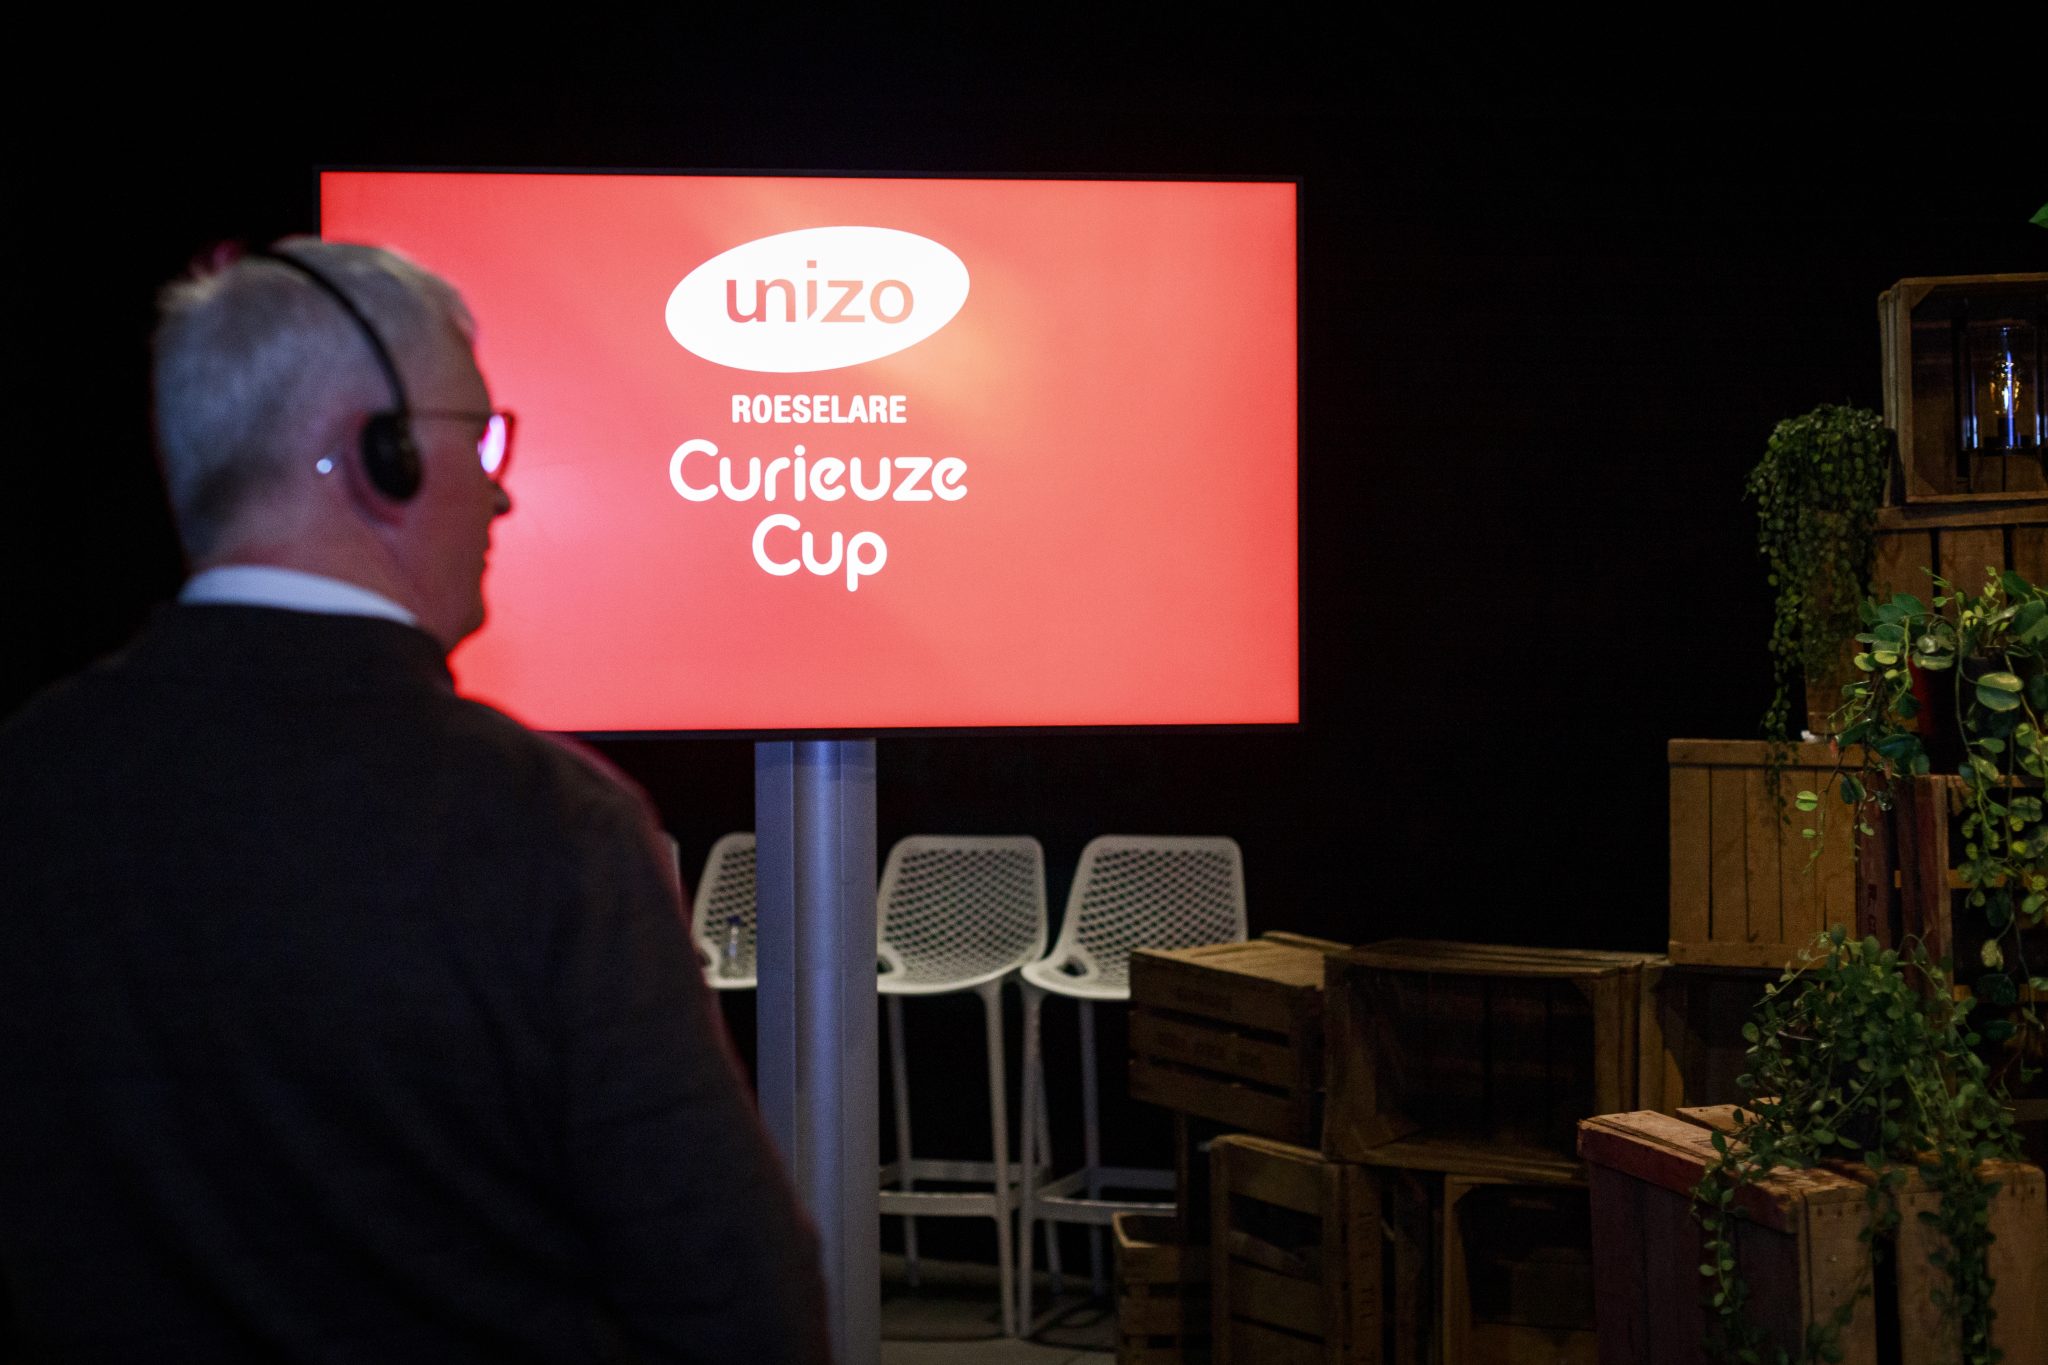 Curieuze cup Unizo Roeselare